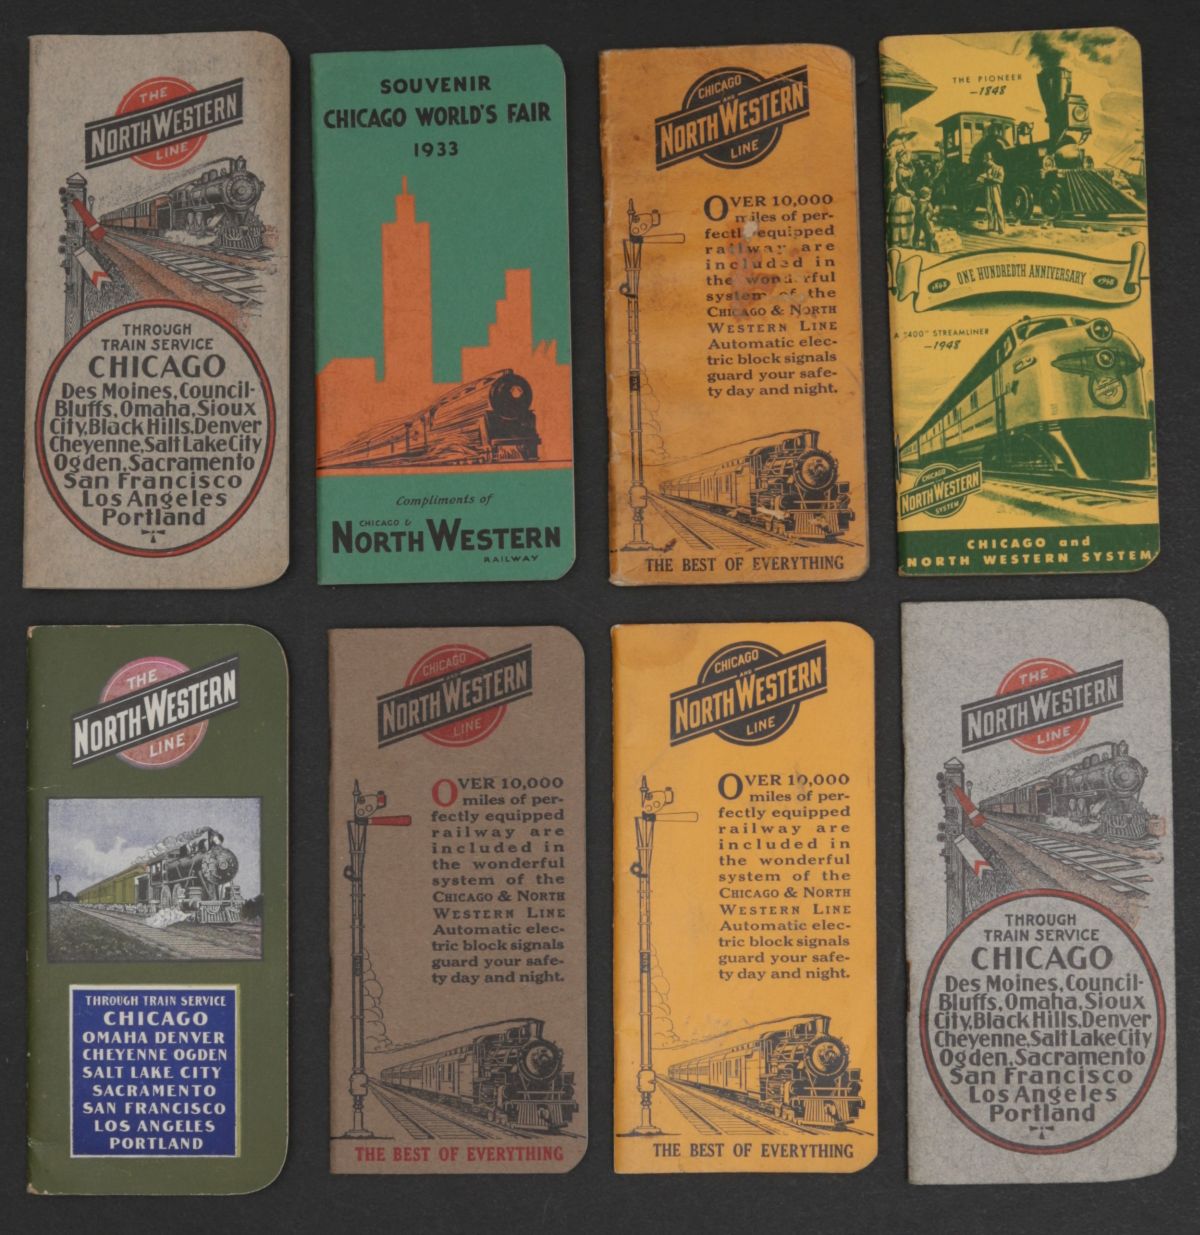 39 PIECES OF CHICAGO AND NORTH WESTERN RR EPHEMERA